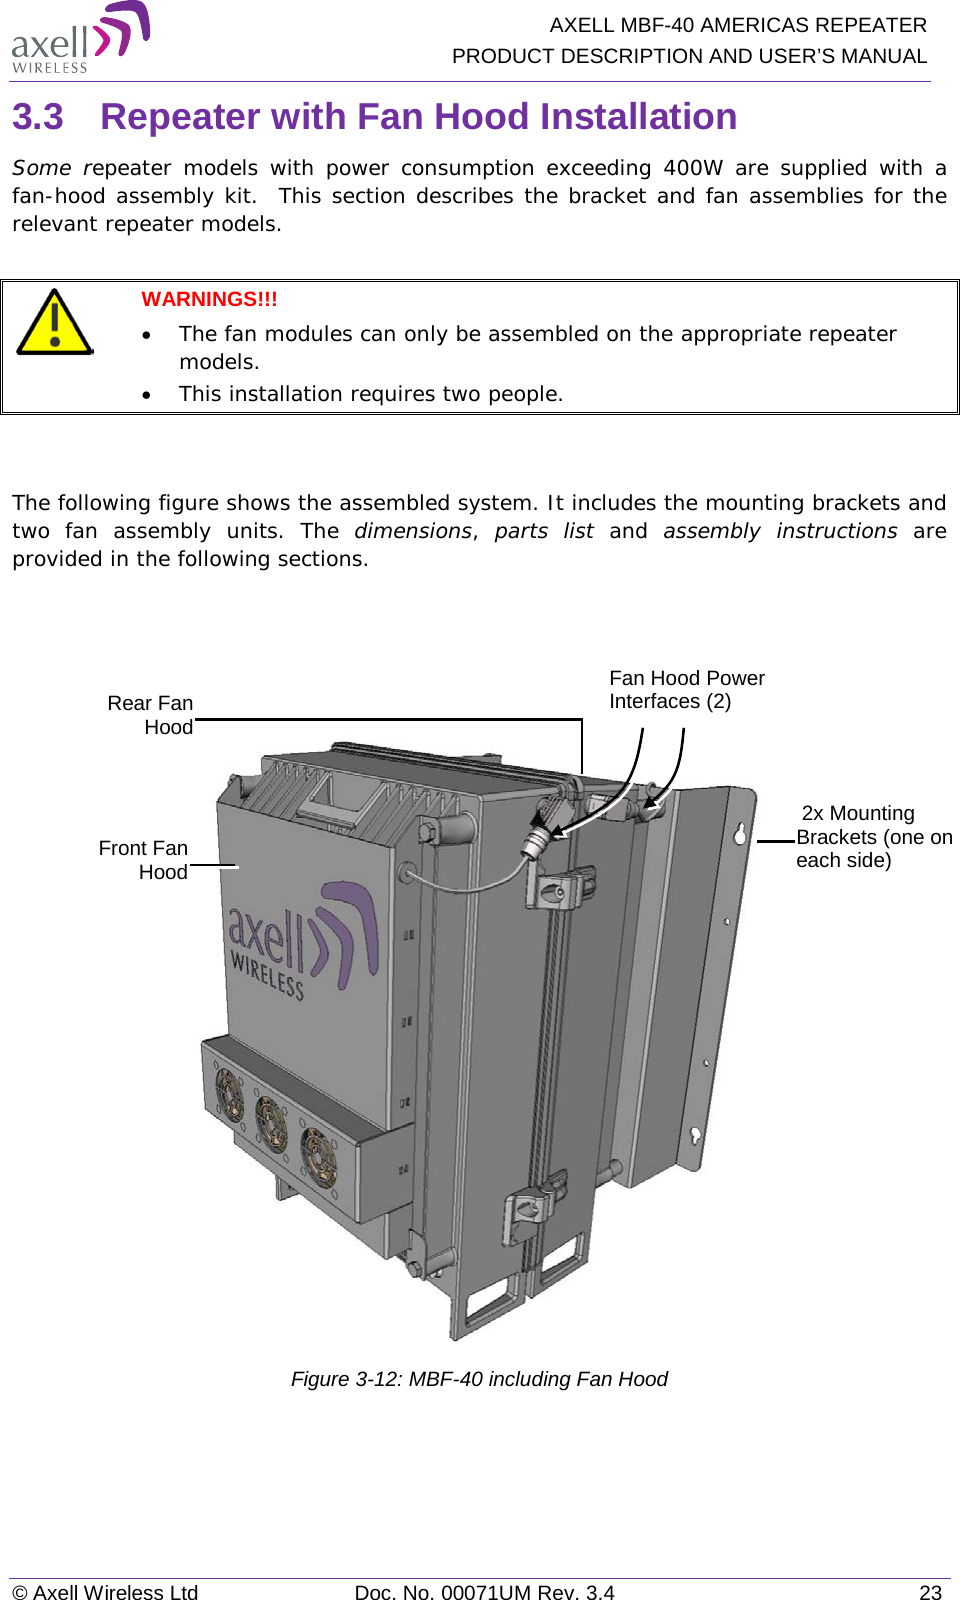   AXELL MBF-40 AMERICAS REPEATER PRODUCT DESCRIPTION AND USER’S MANUAL © Axell Wireless Ltd Doc. No. 00071UM Rev. 3.4 23 3.3  Repeater with Fan Hood Installation Some repeater  models with power consumption exceeding 400W are supplied with a fan-hood assembly kit.  This section describes the bracket and fan assemblies for the relevant repeater models.   WARNINGS!!!  • The fan modules can only be assembled on the appropriate repeater models. • This installation requires two people.   The following figure shows the assembled system. It includes the mounting brackets and two fan assembly units. The dimensions,  parts list and  assembly instructions are provided in the following sections.       Figure  3-12: MBF-40 including Fan Hood   2x Mounting Brackets (one on each side) Rear Fan Hood Front Fan Hood Fan Hood Power Interfaces (2) 